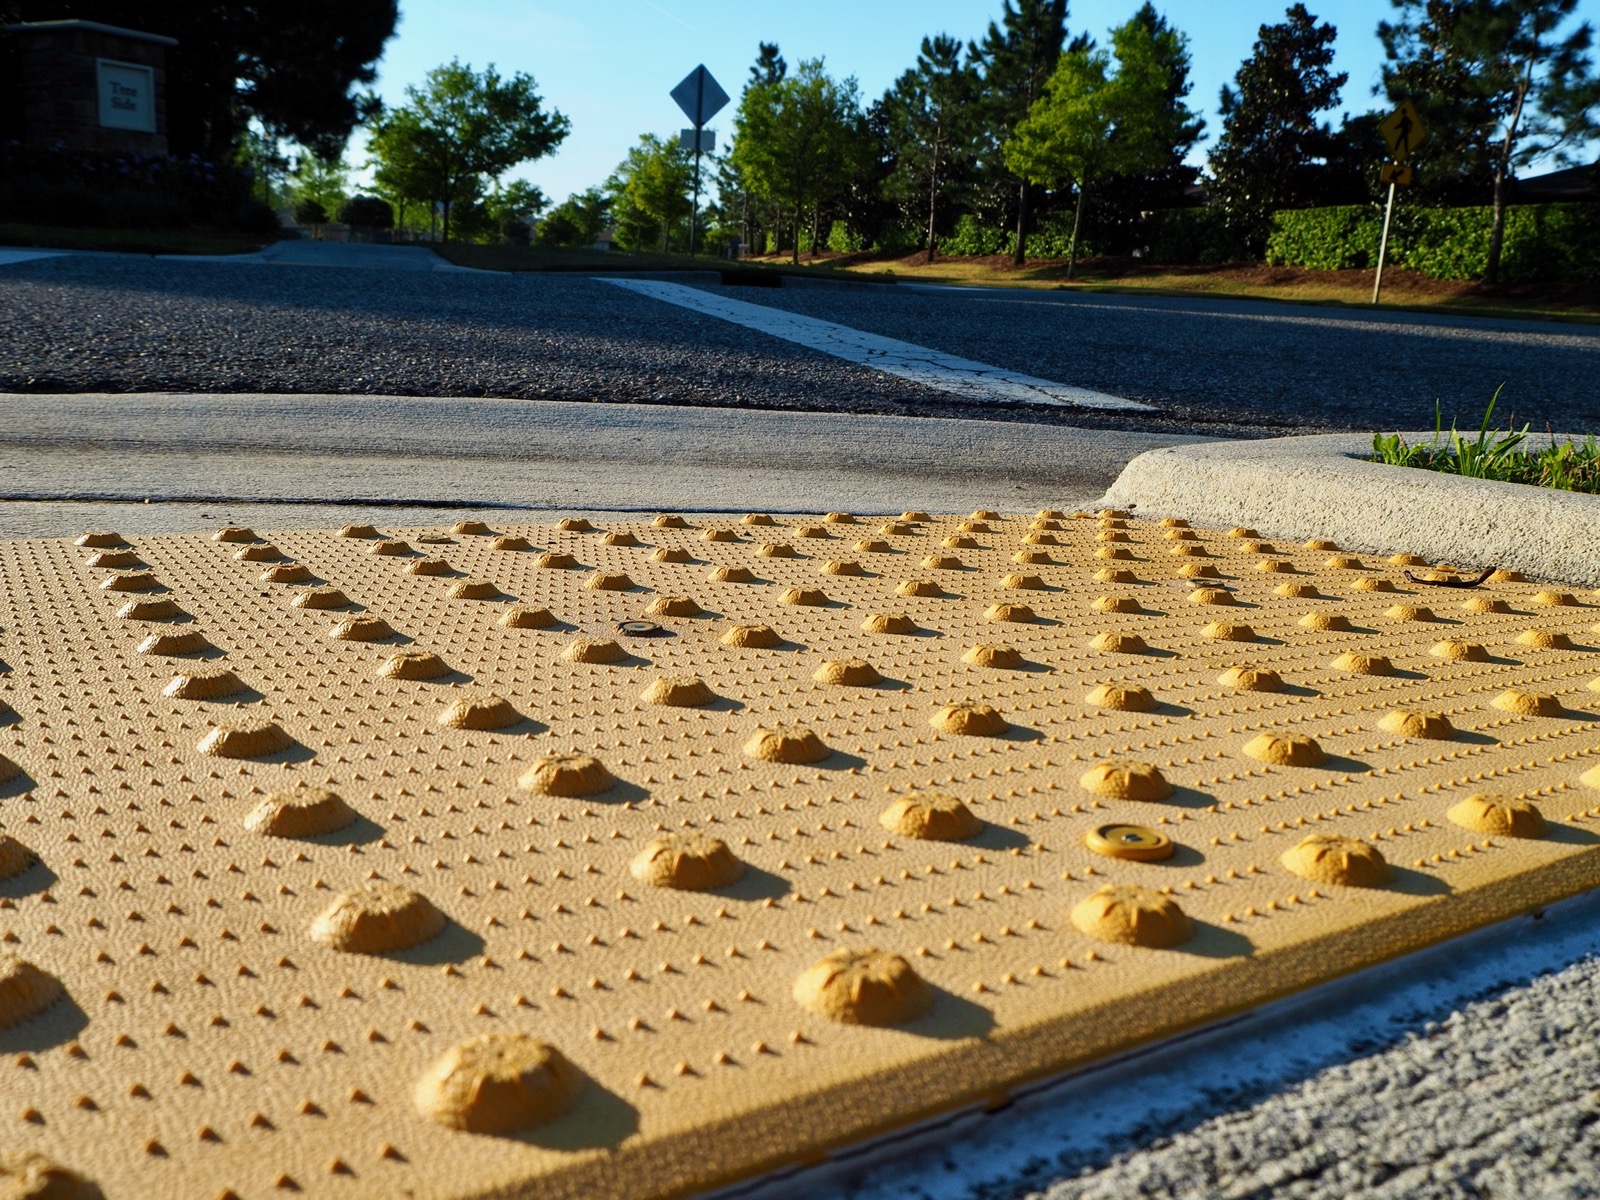 Closeup of a yellow detectable warning surface at a crosswalk from a low angle.